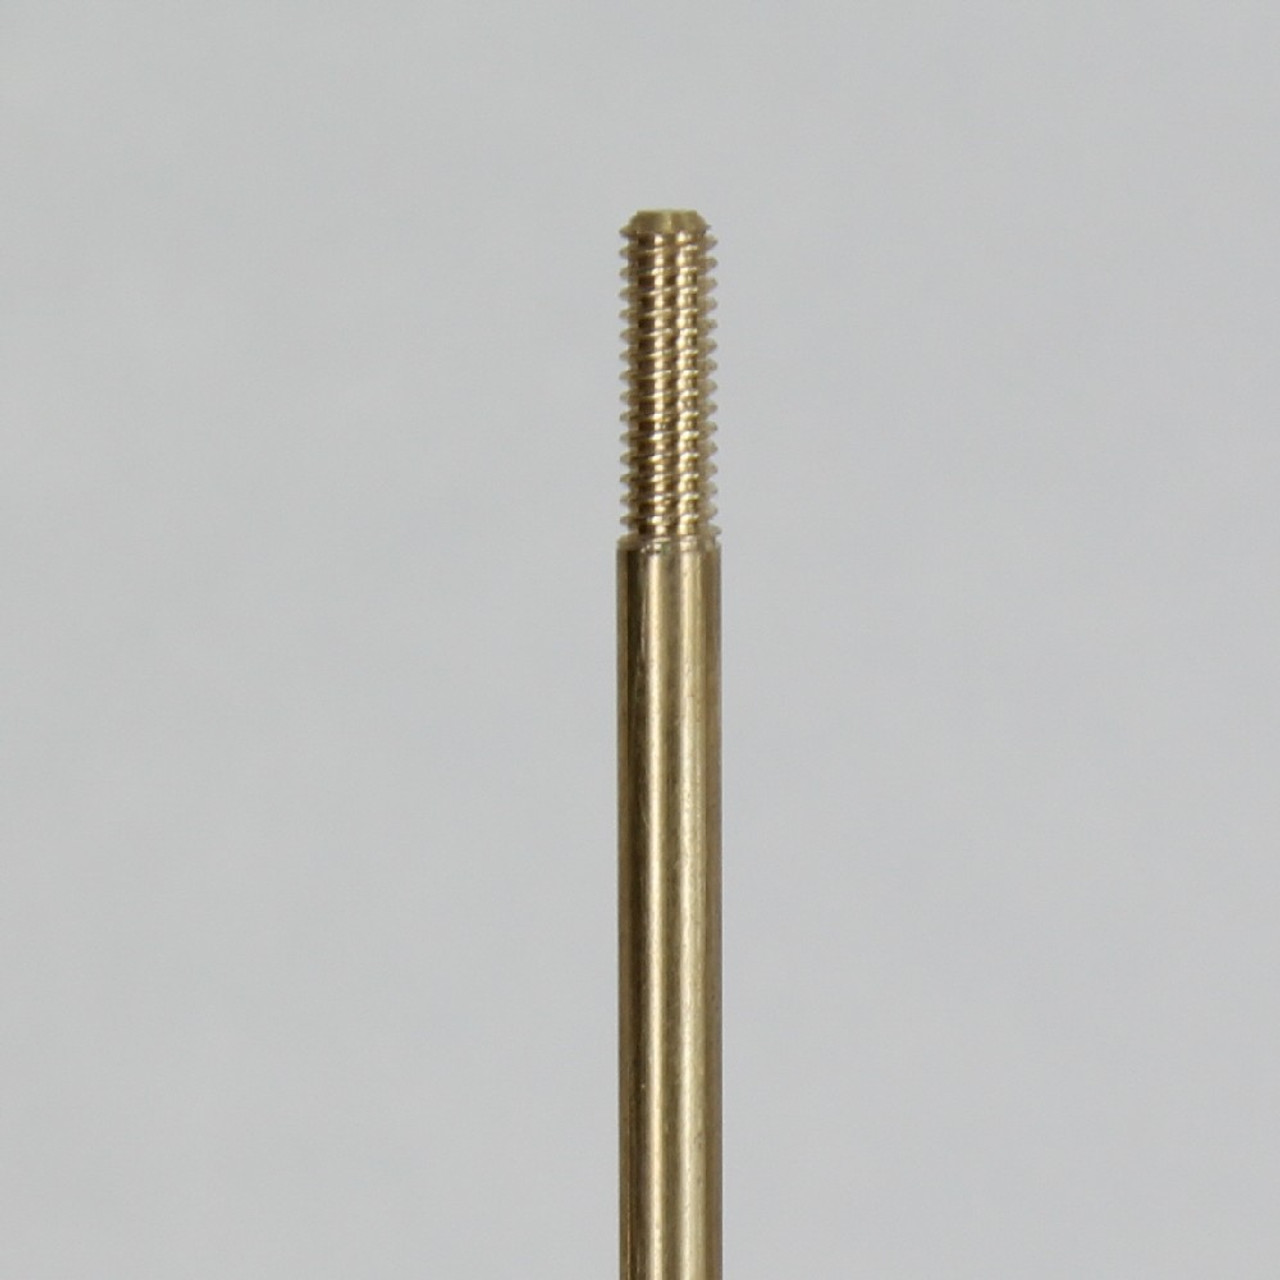 3 in. Long - 8/32 Threaded Brass Rod with 1/2in Long Thread on Both Ends.